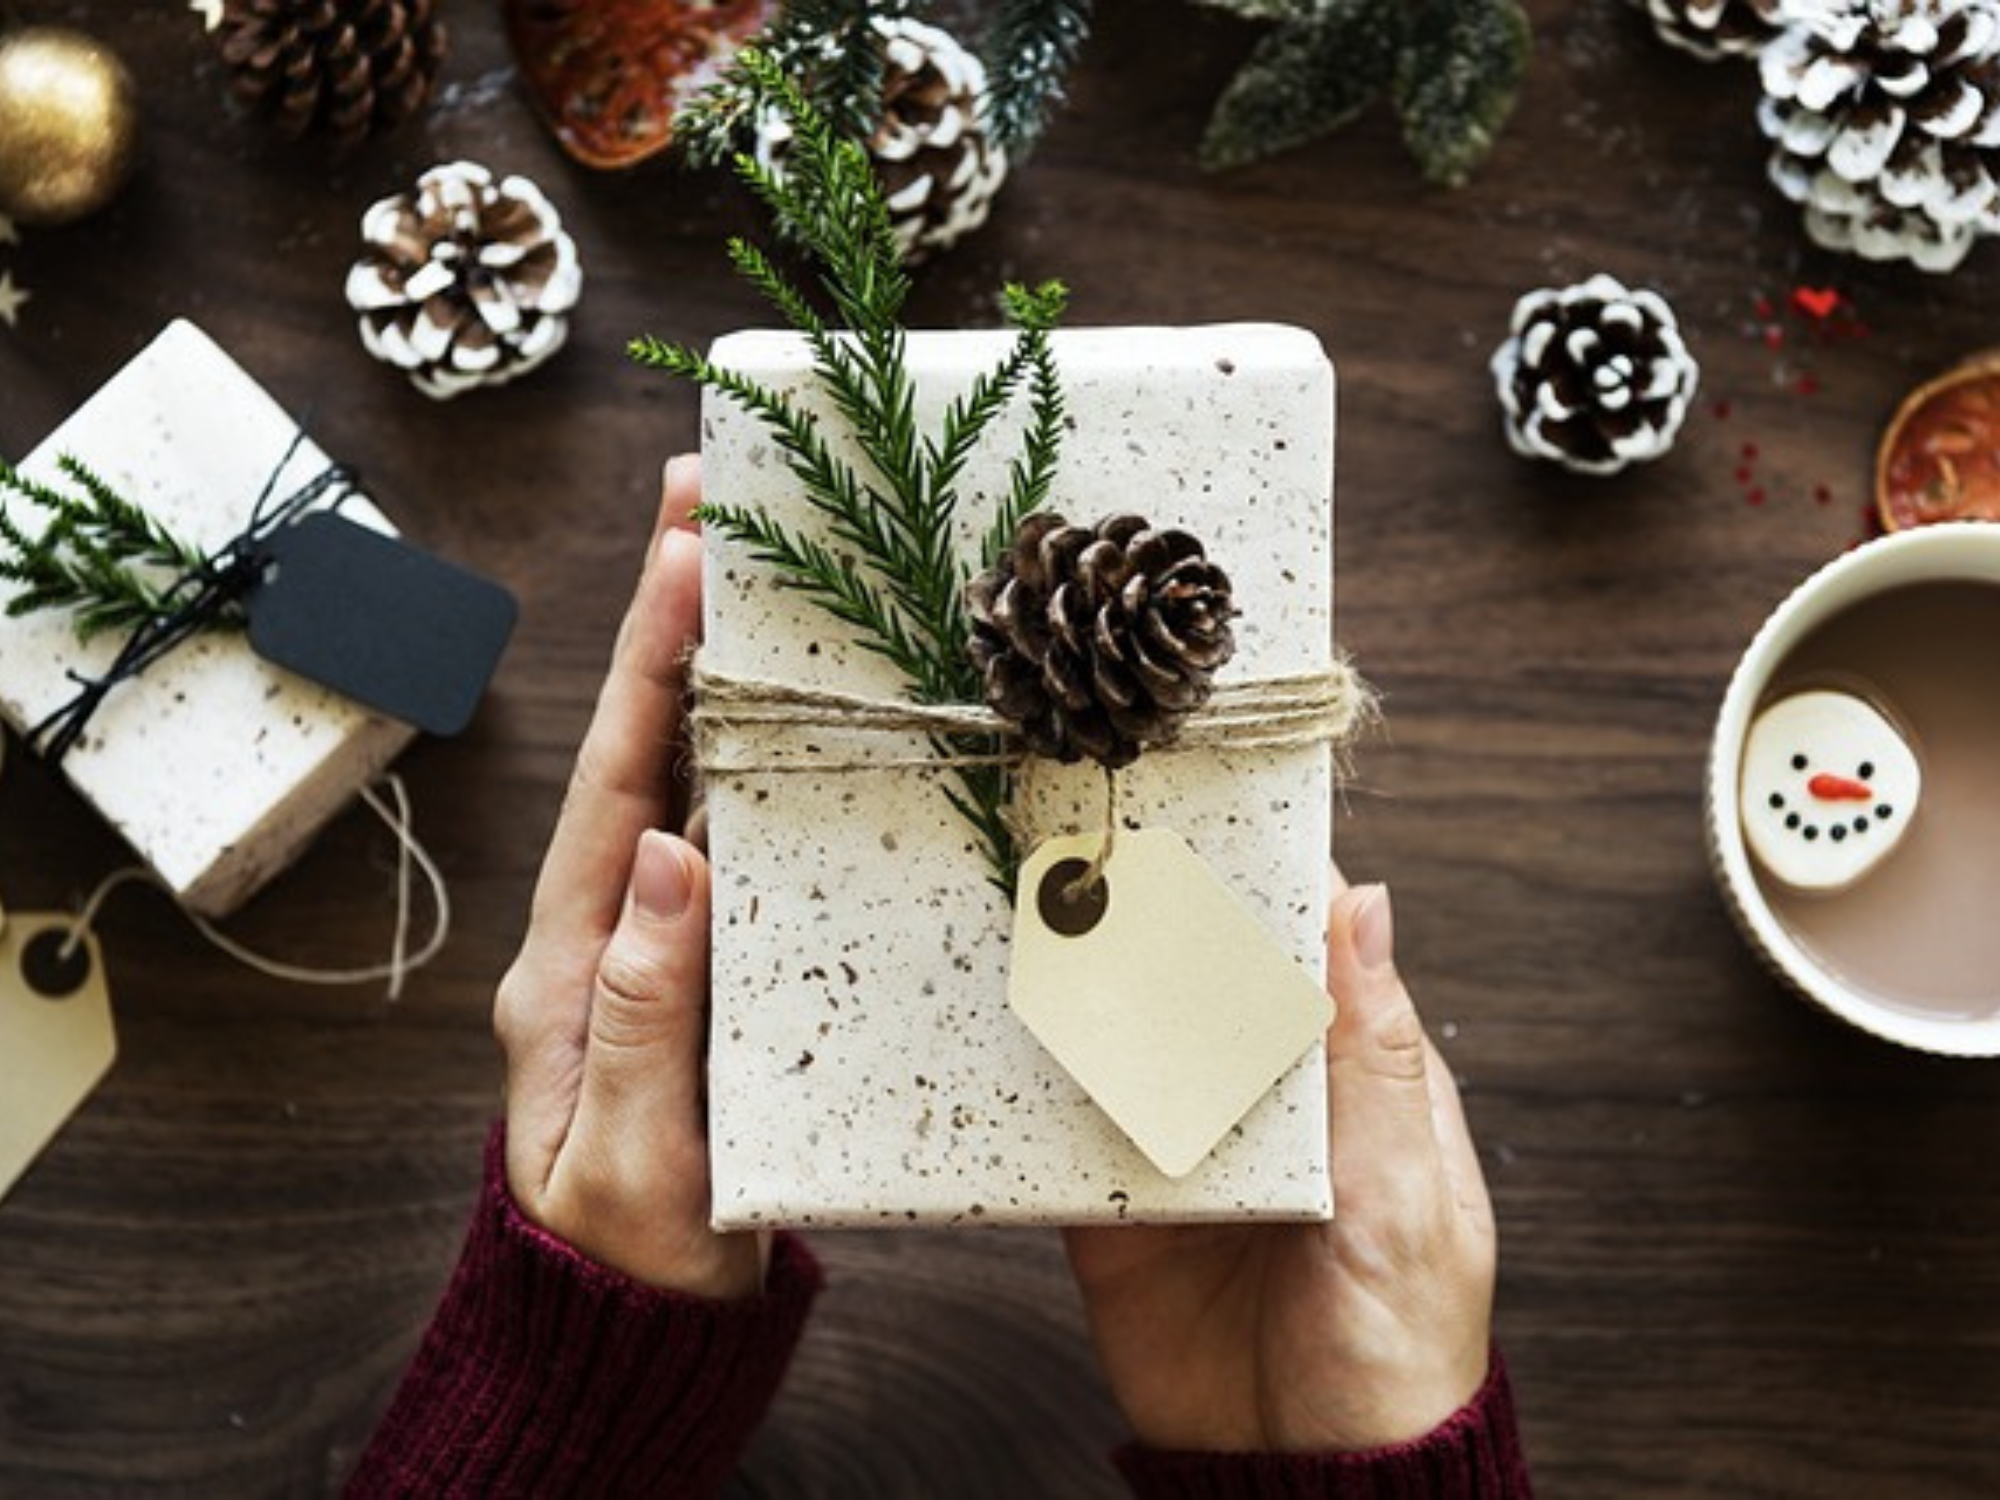 5 TIPS FOR RENTERS FOR EASY HOLIDAY ENTERTAINING